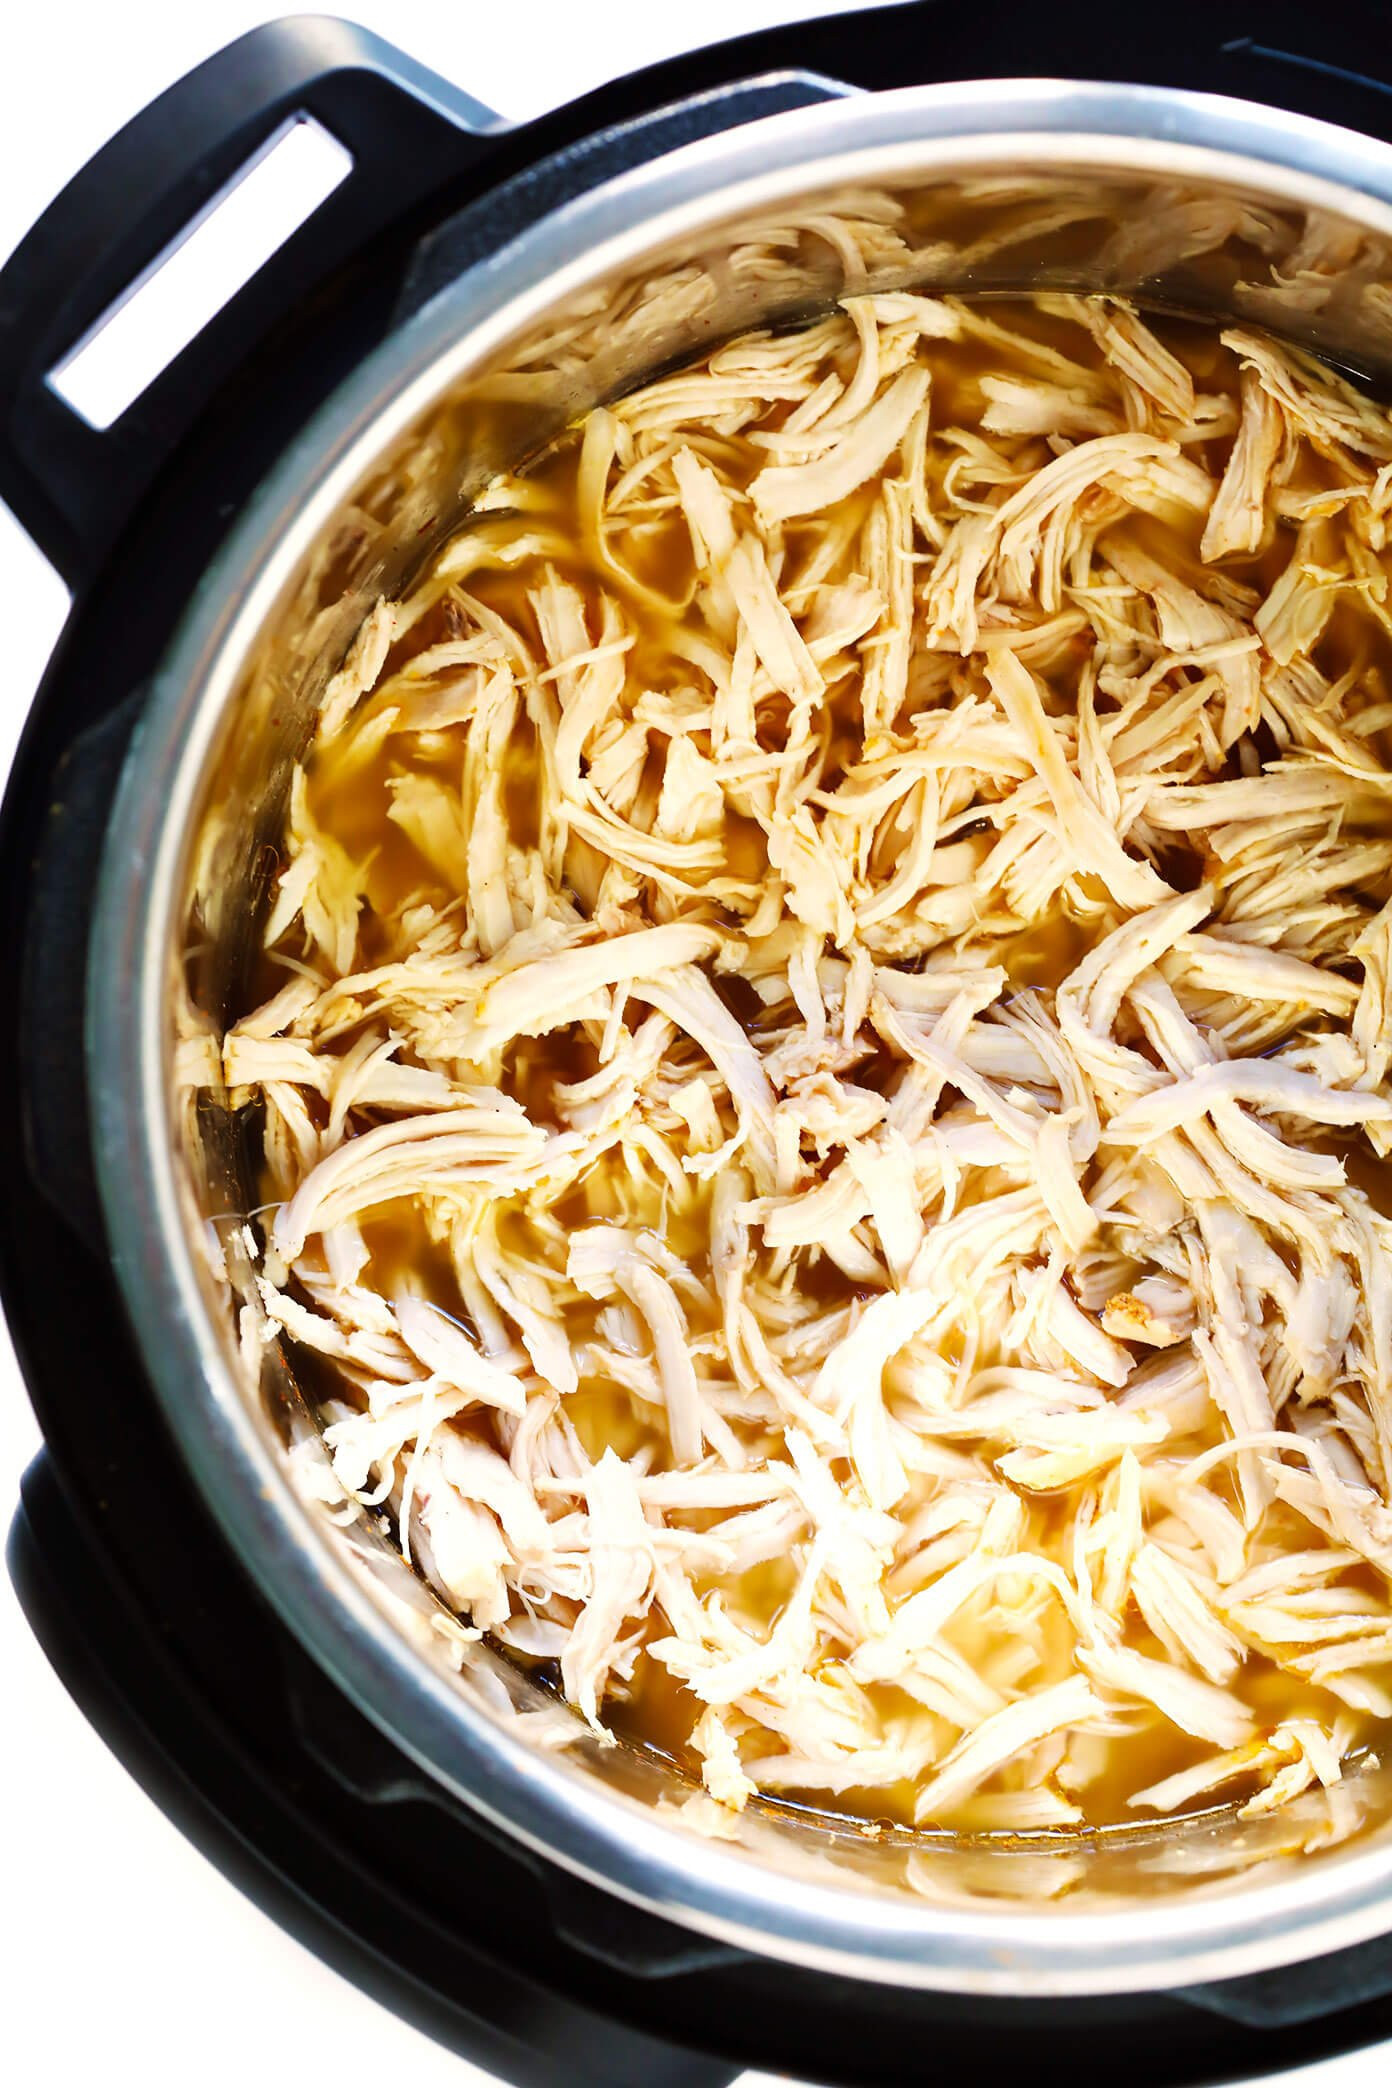 Instant Pot Shredded Chicken Recipes Awesome Instant Pot Shredded Chicken